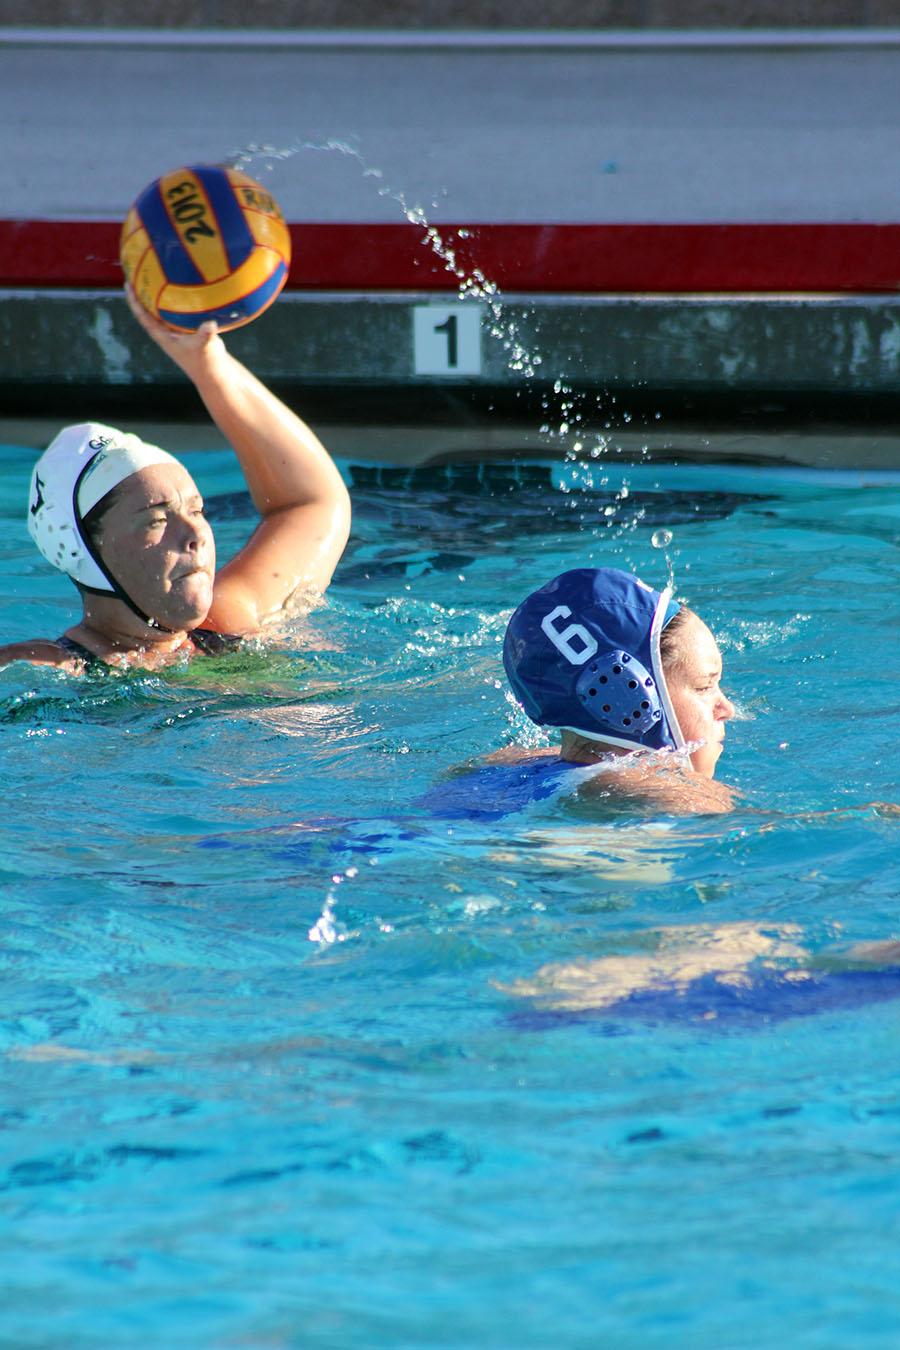 Whats Water Polo?